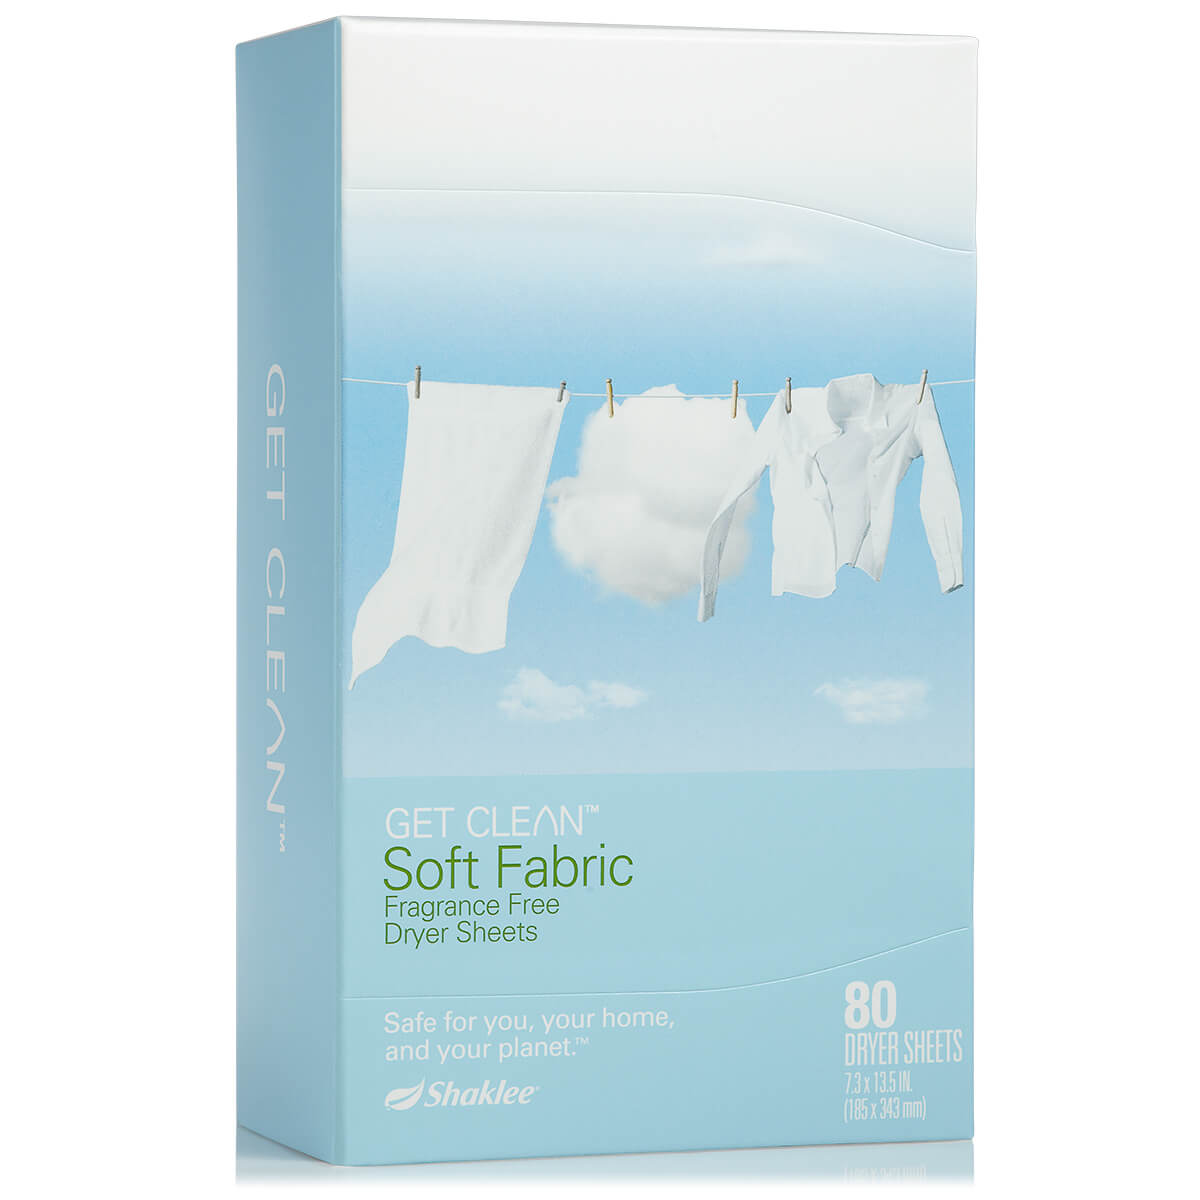 Soft Fabric Fragrance Free Dryer Sheets (80 Sheets)